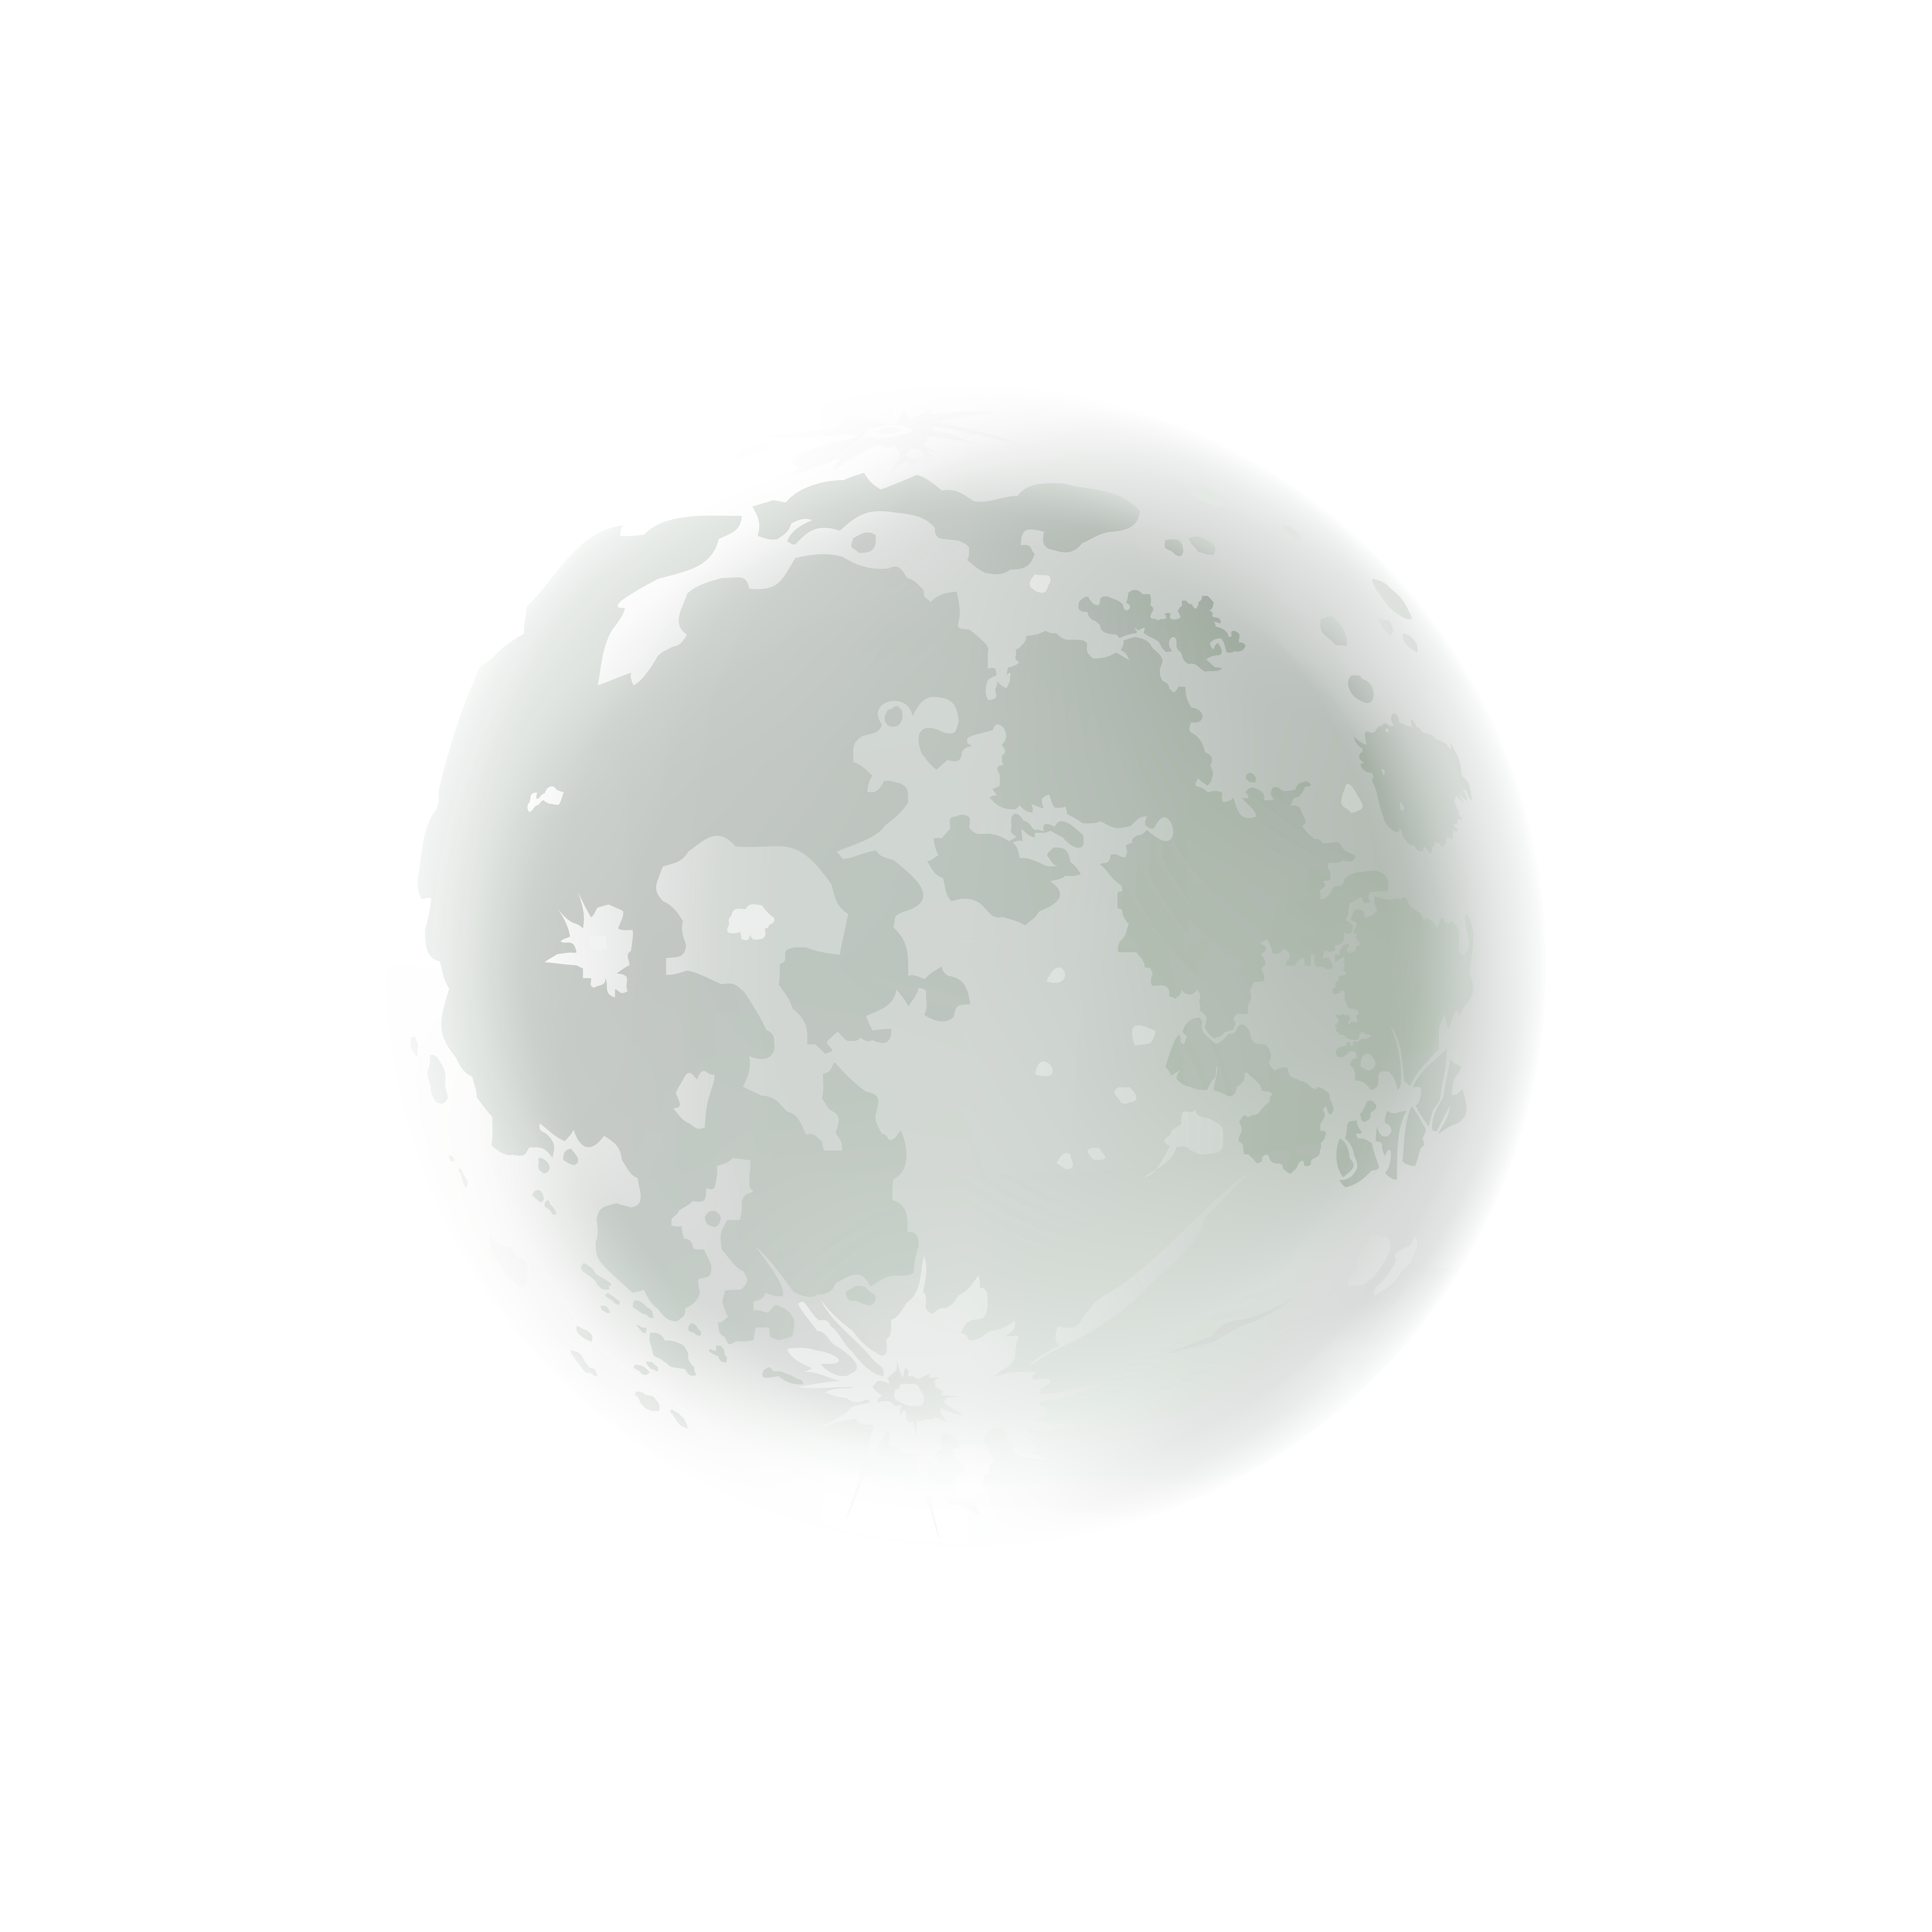 Moonlight download clipart images gallery for free download